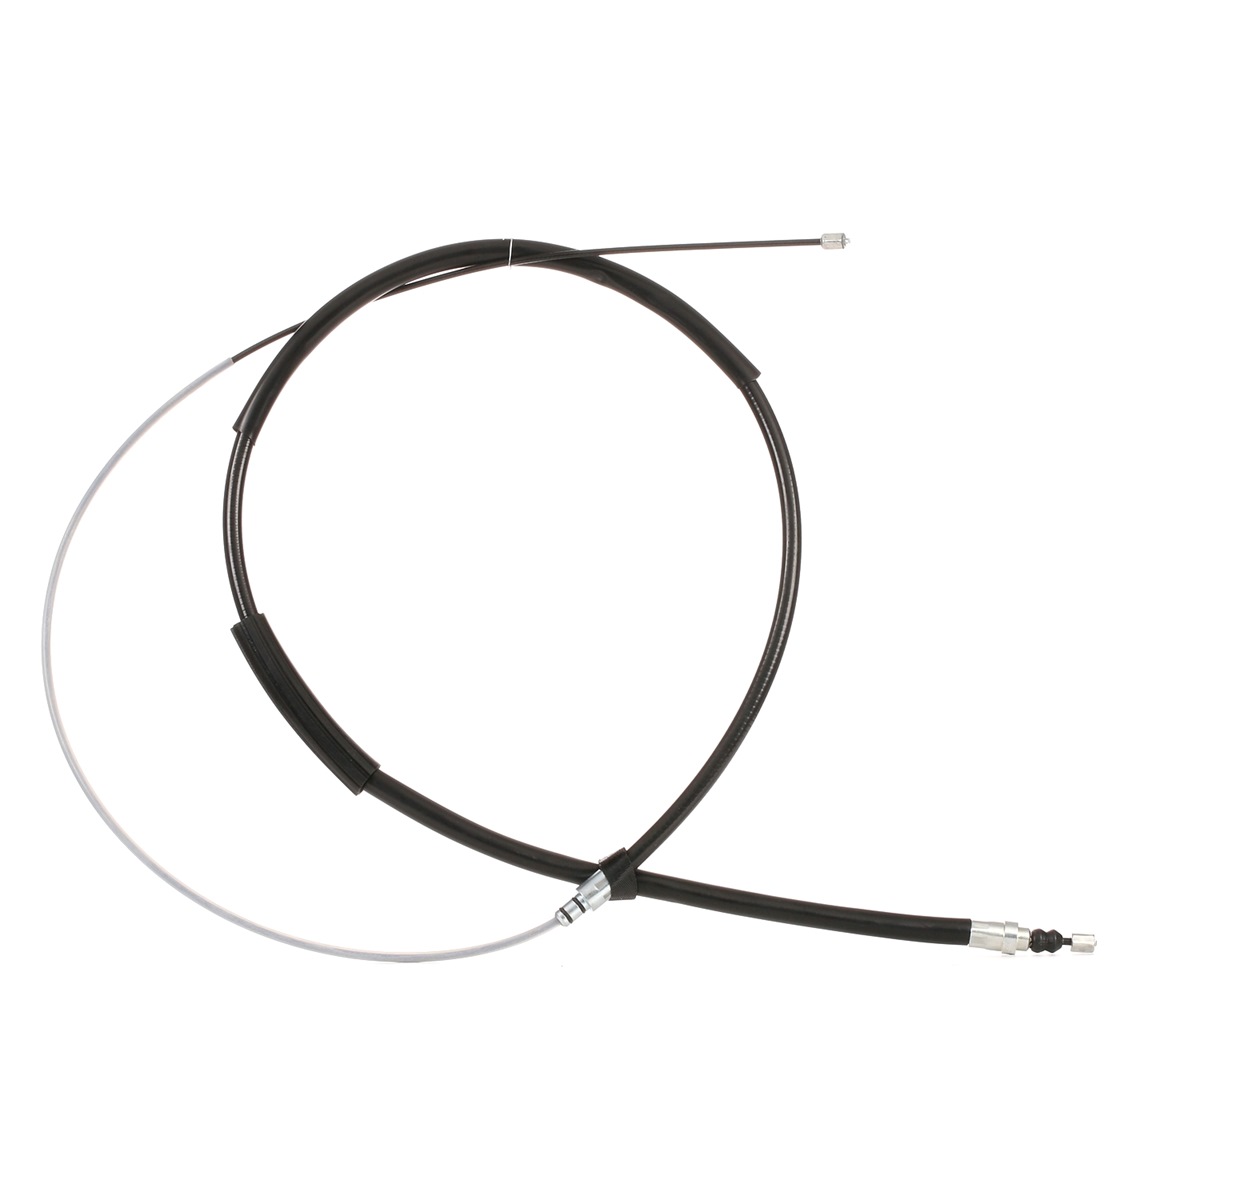 RIDEX 124C0627 Hand brake cable Rear, Left, Right, 1940/1080mm, Disc Brake